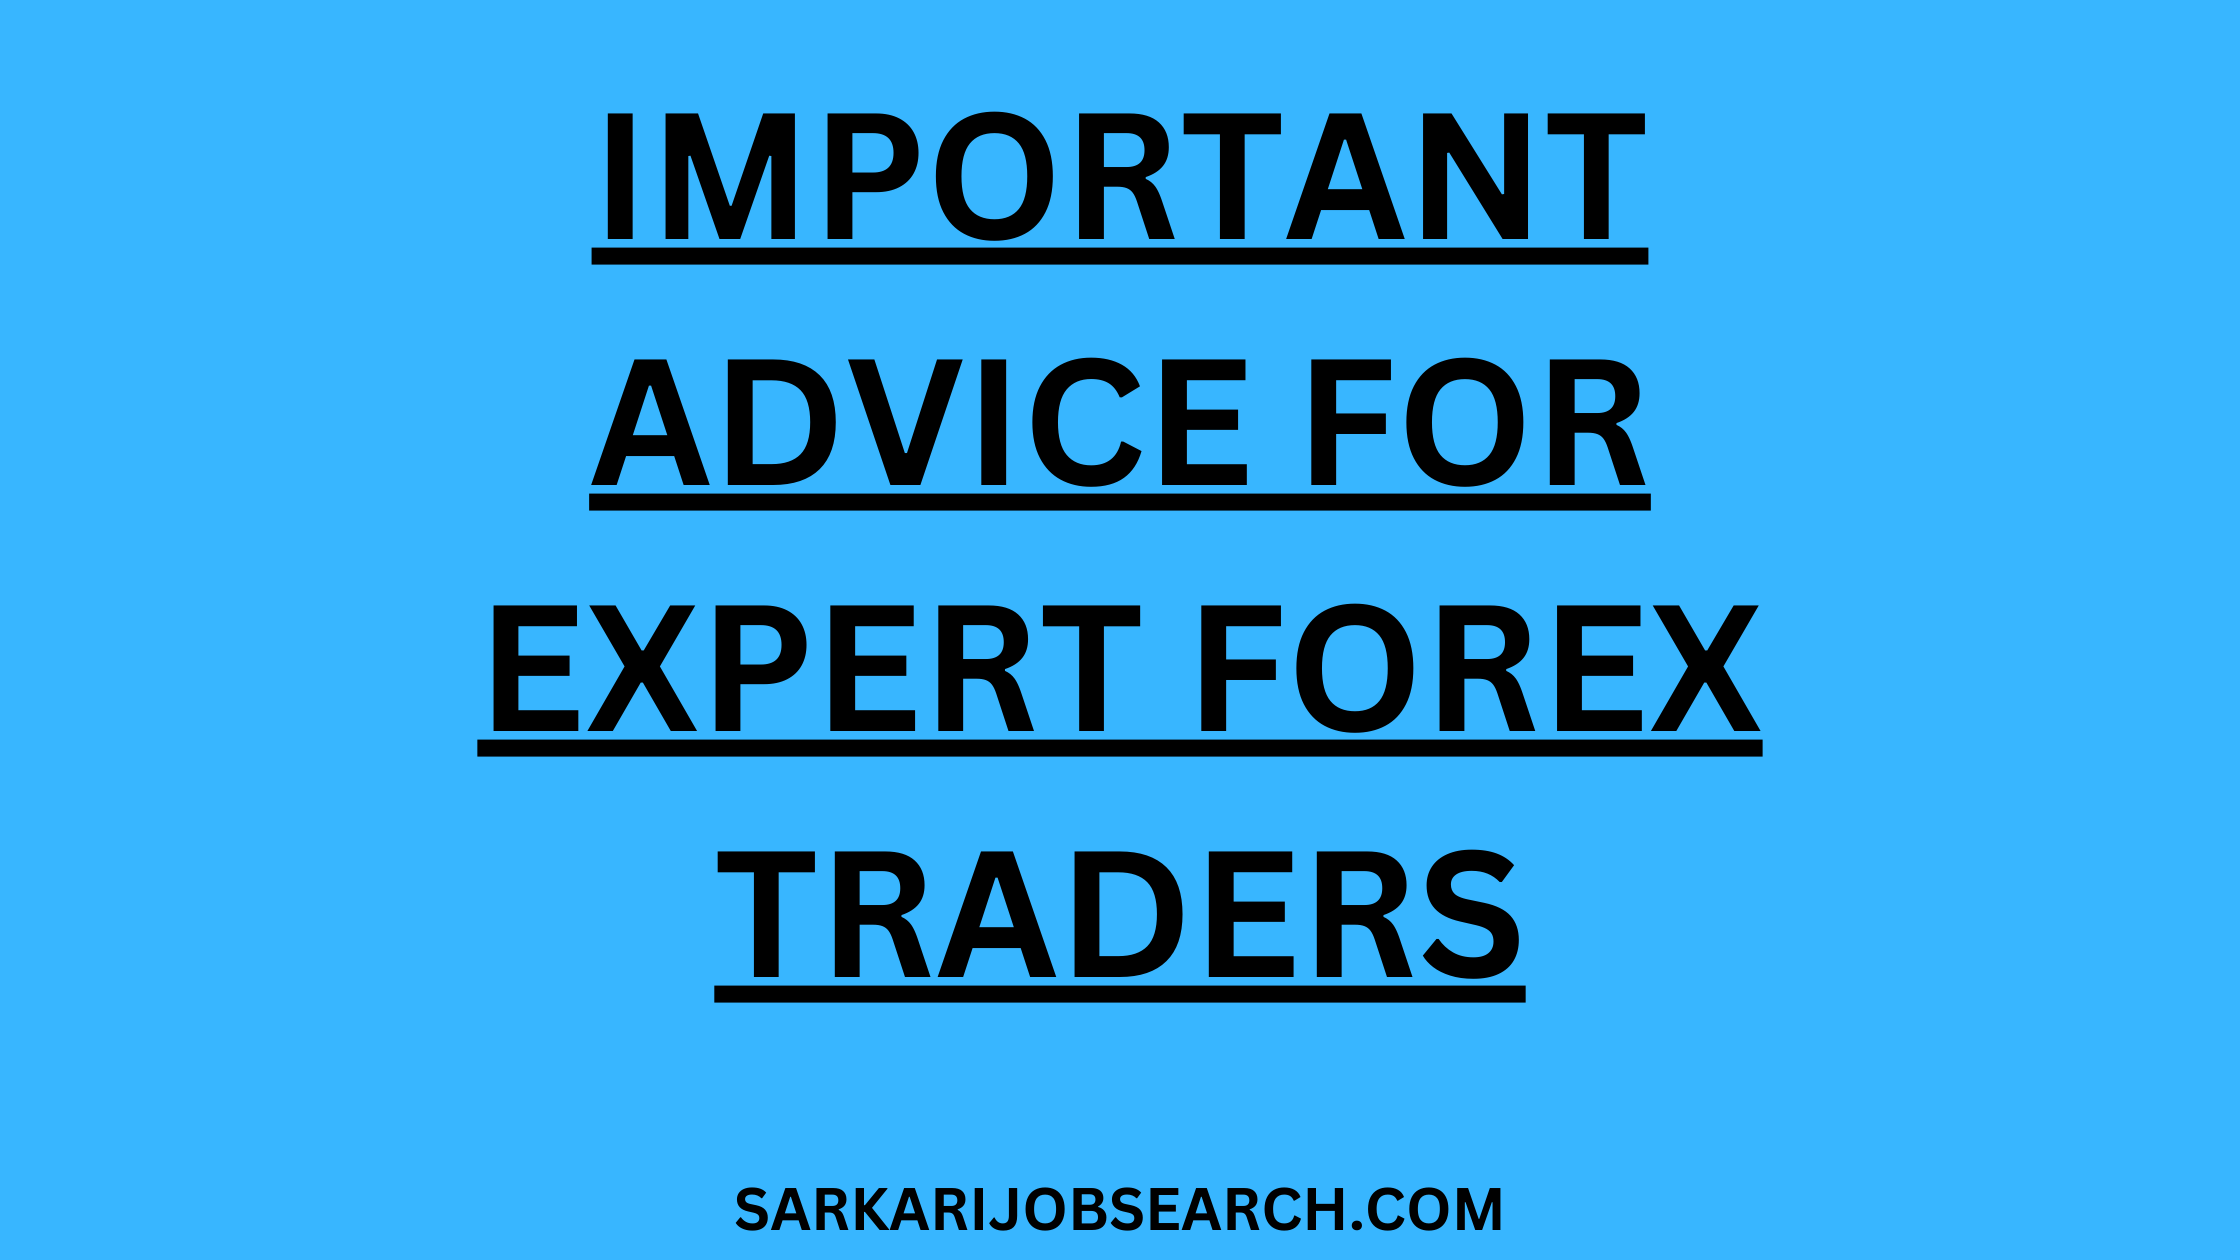 Important Advice For Expert Forex Traders